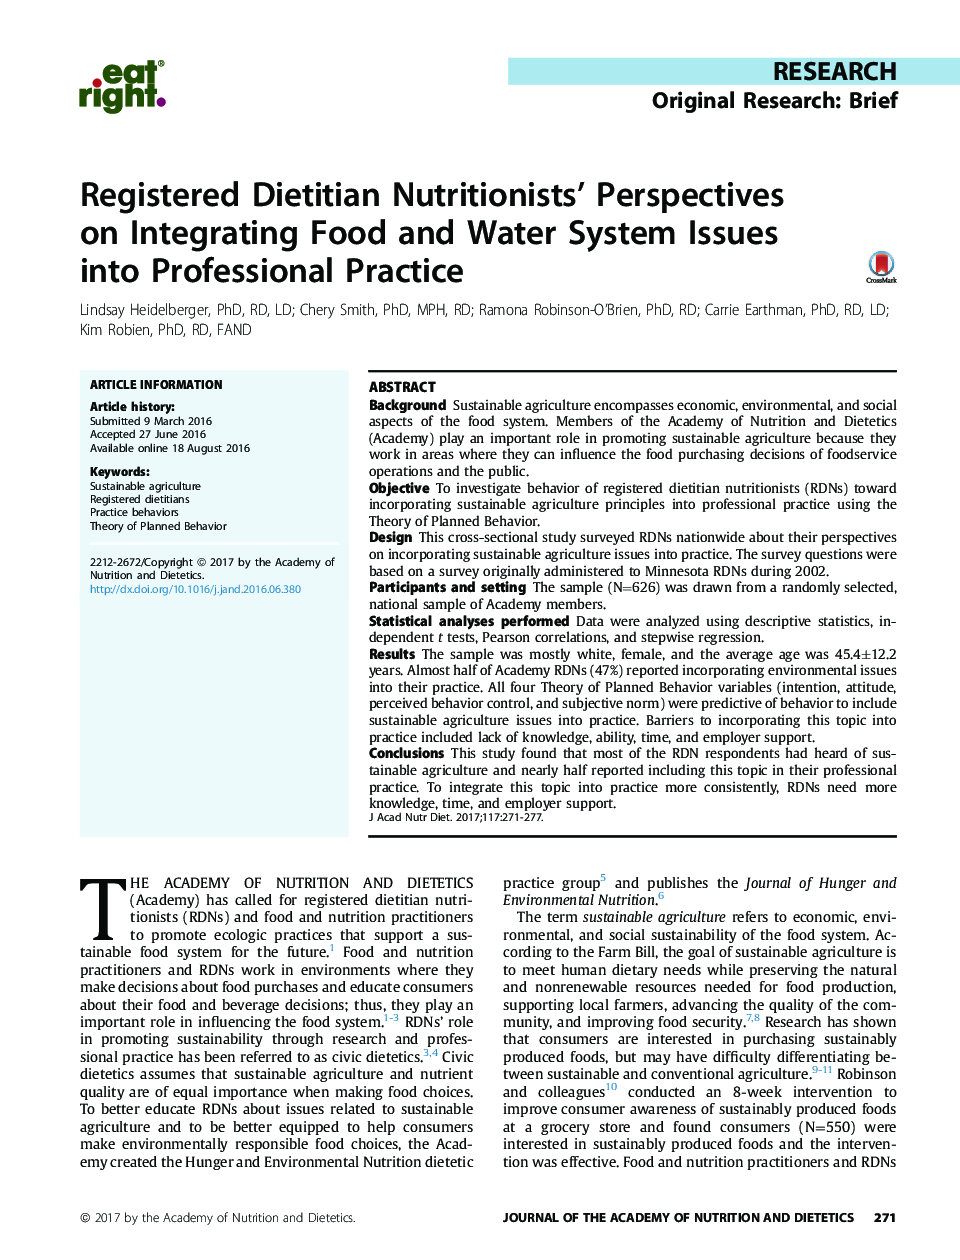 Registered Dietitian Nutritionists' Perspectives on Integrating Food and Water System Issues into Professional Practice